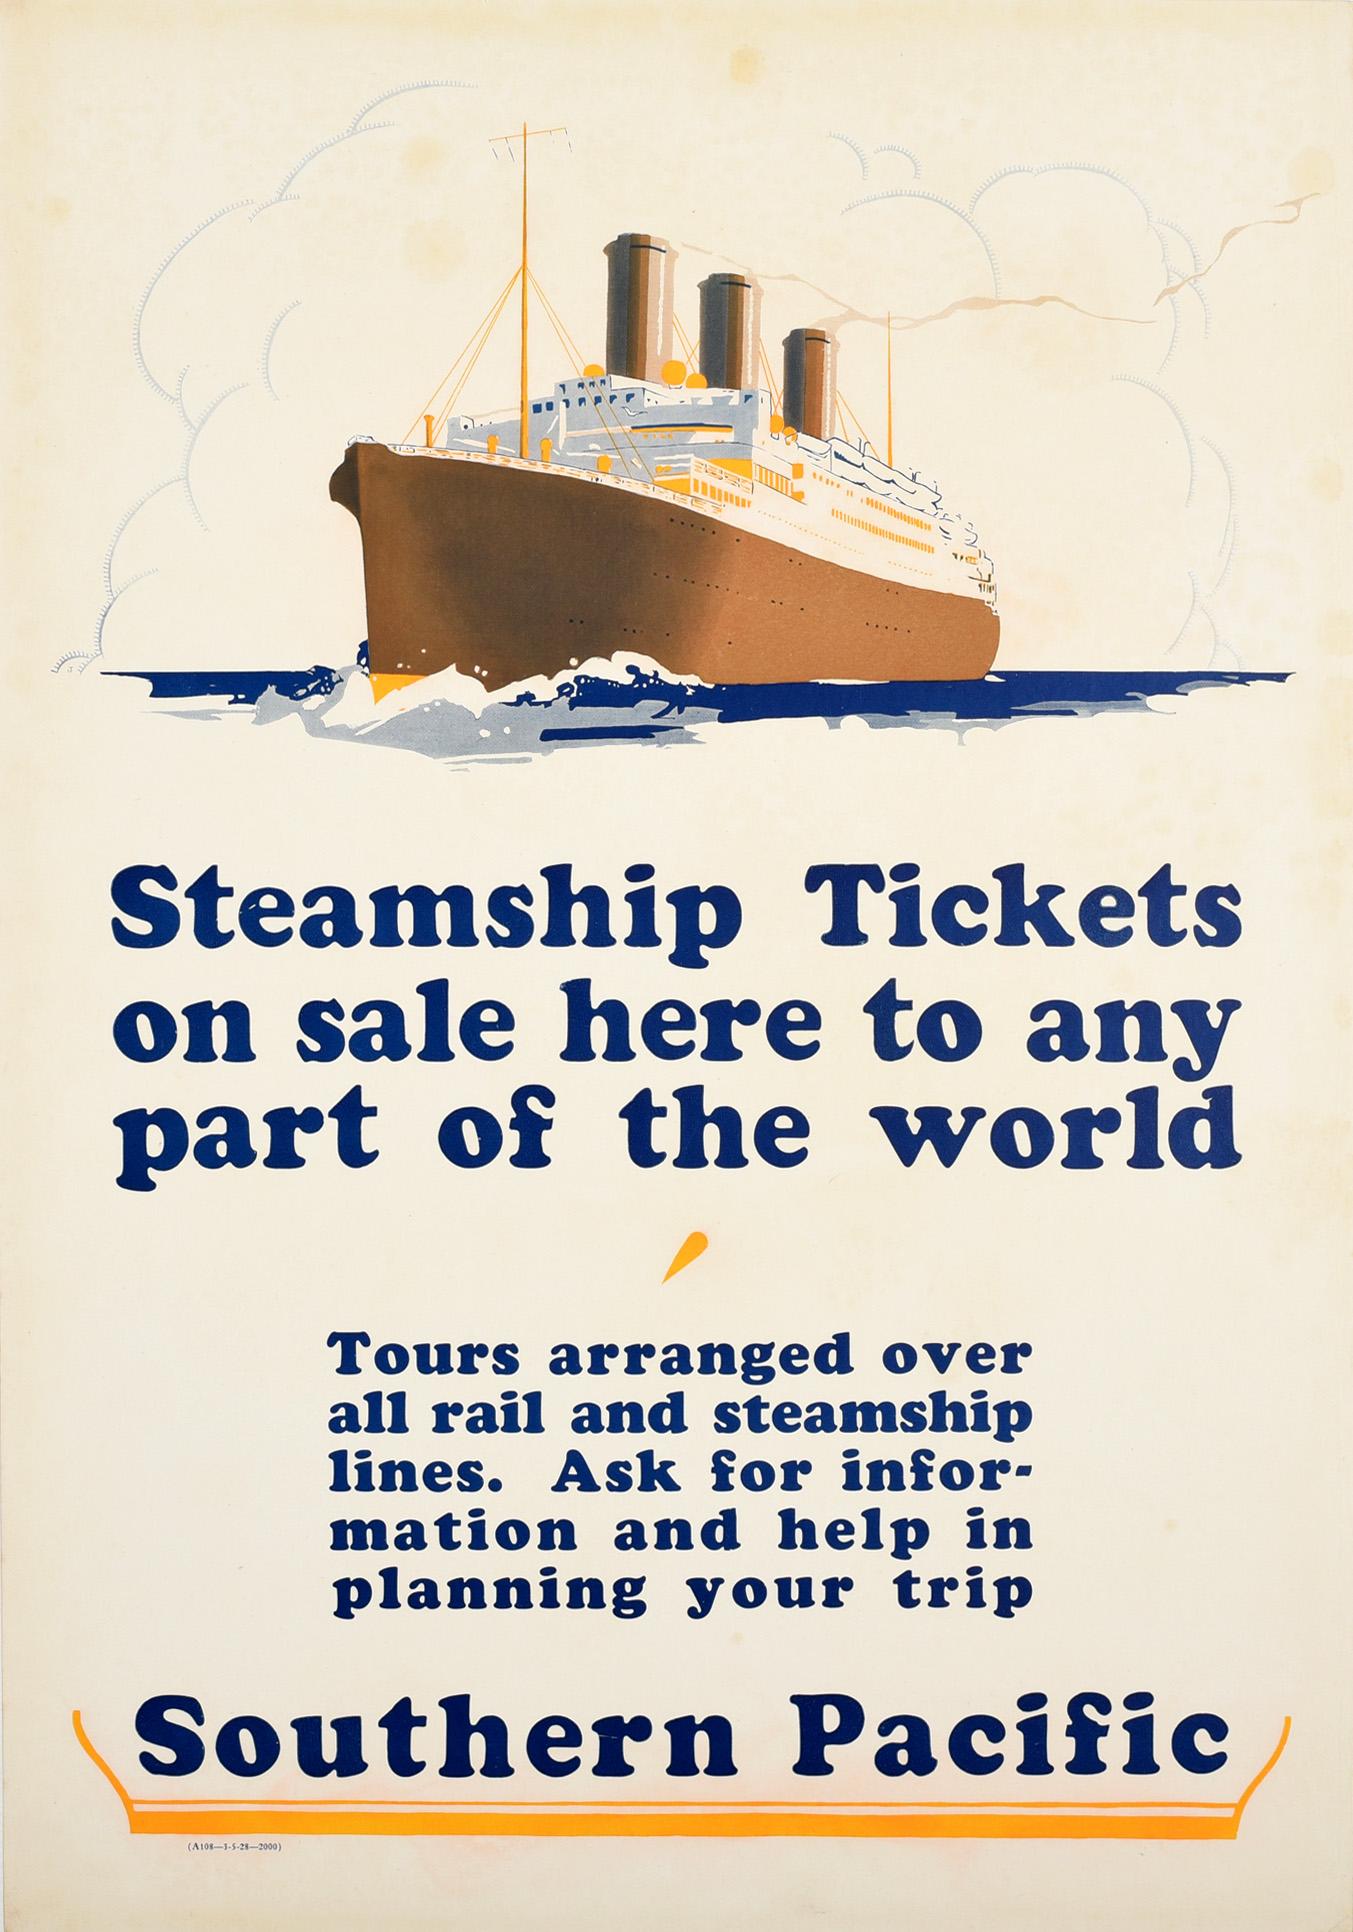 Unknown Print - Original Vintage Poster Southern Pacific Steamship Ocean Liner Cruise Travel Art